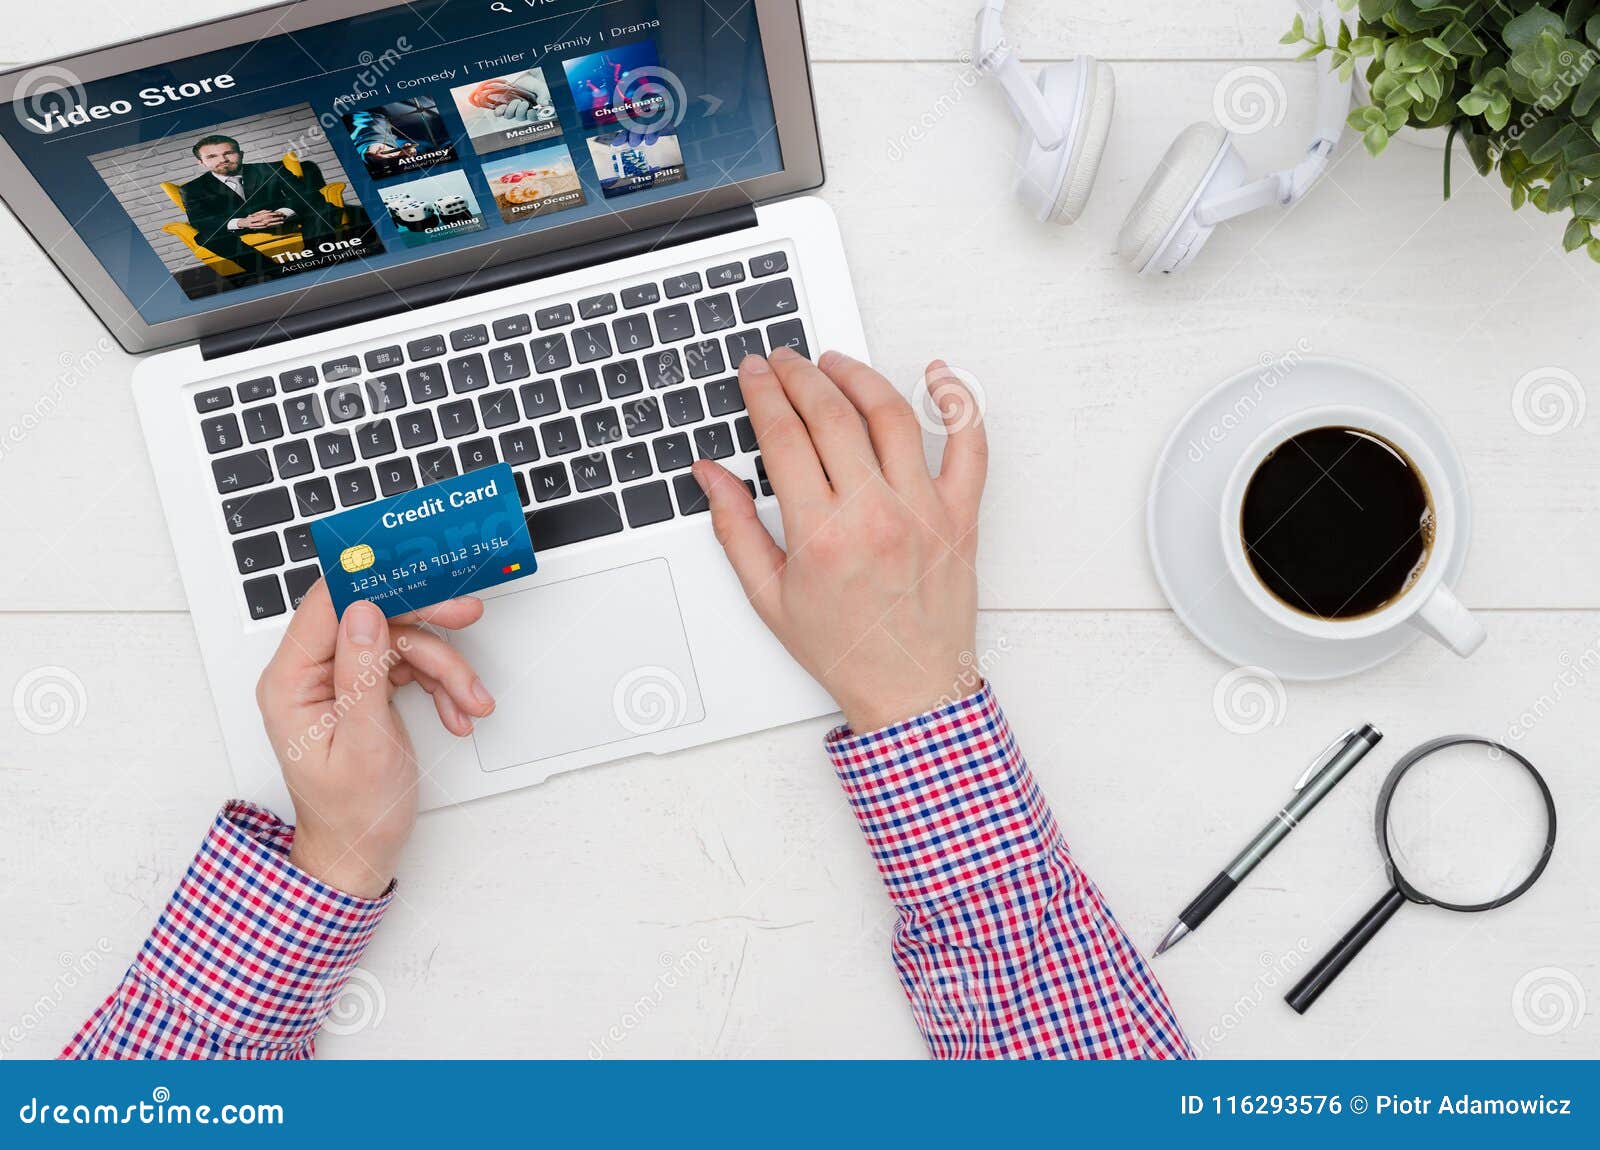 Man Using Credit Card To Pay for Video on Demand Service Stock Photo